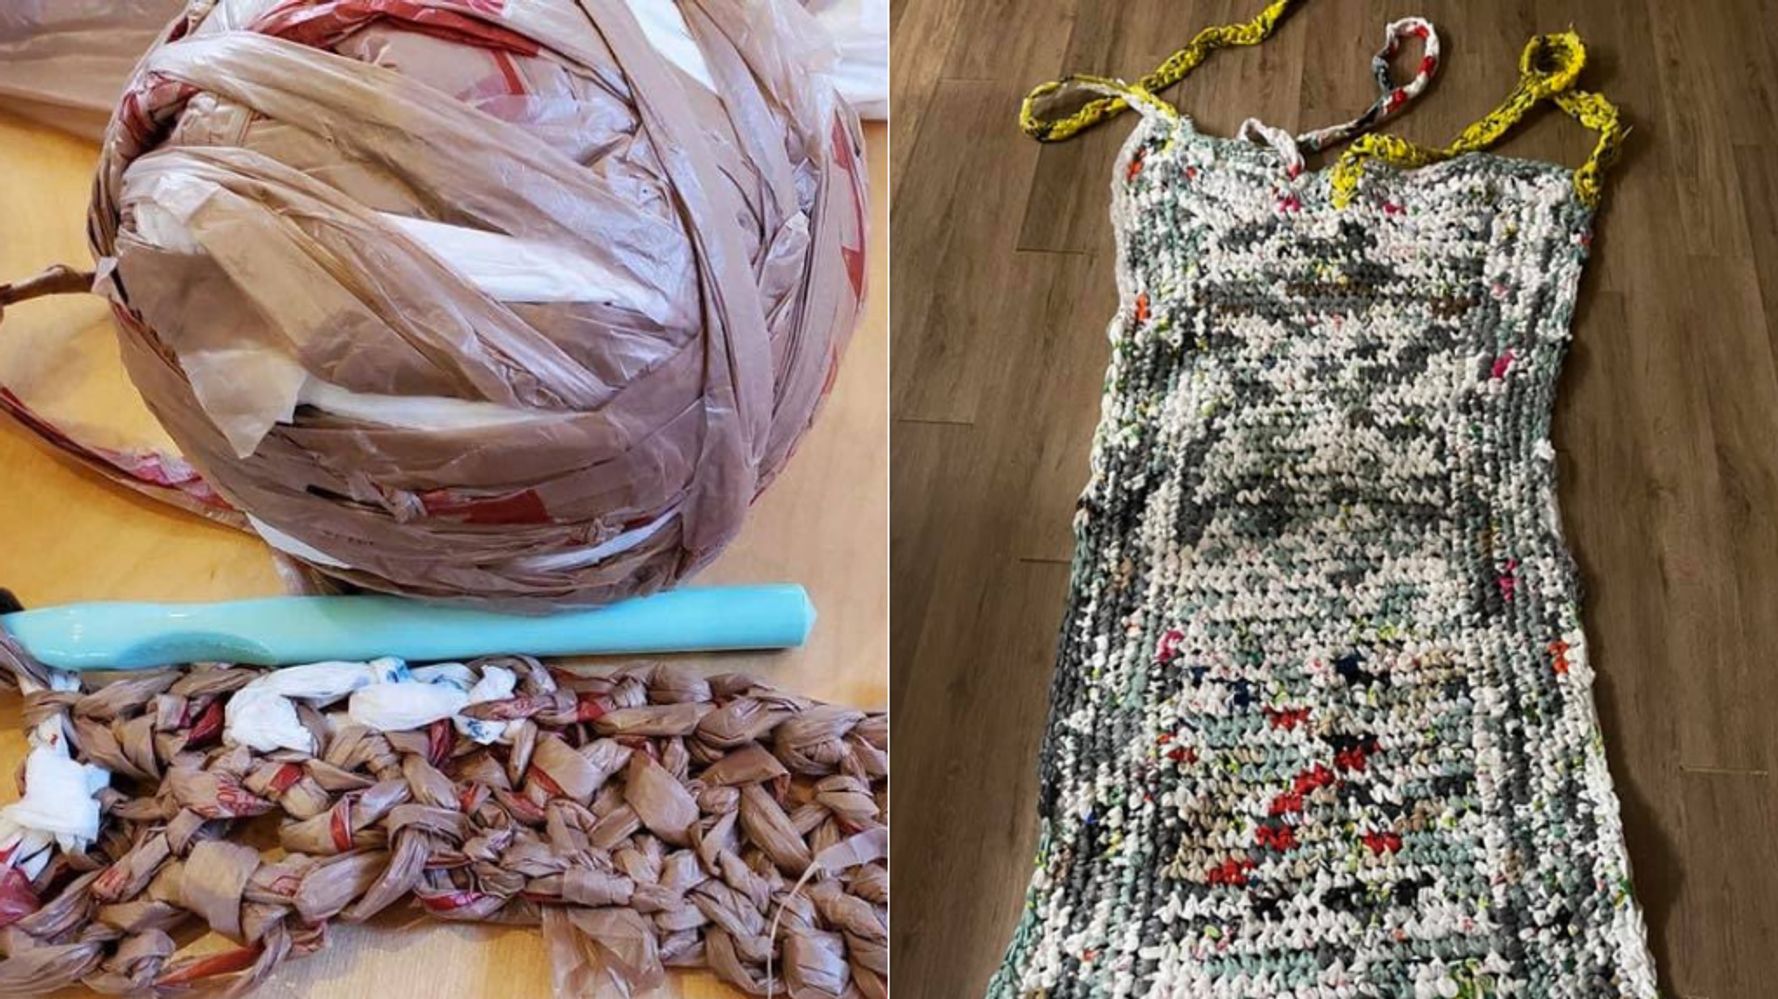 Canadians Crochet Mats From Plastic Bags To Help The Homeless